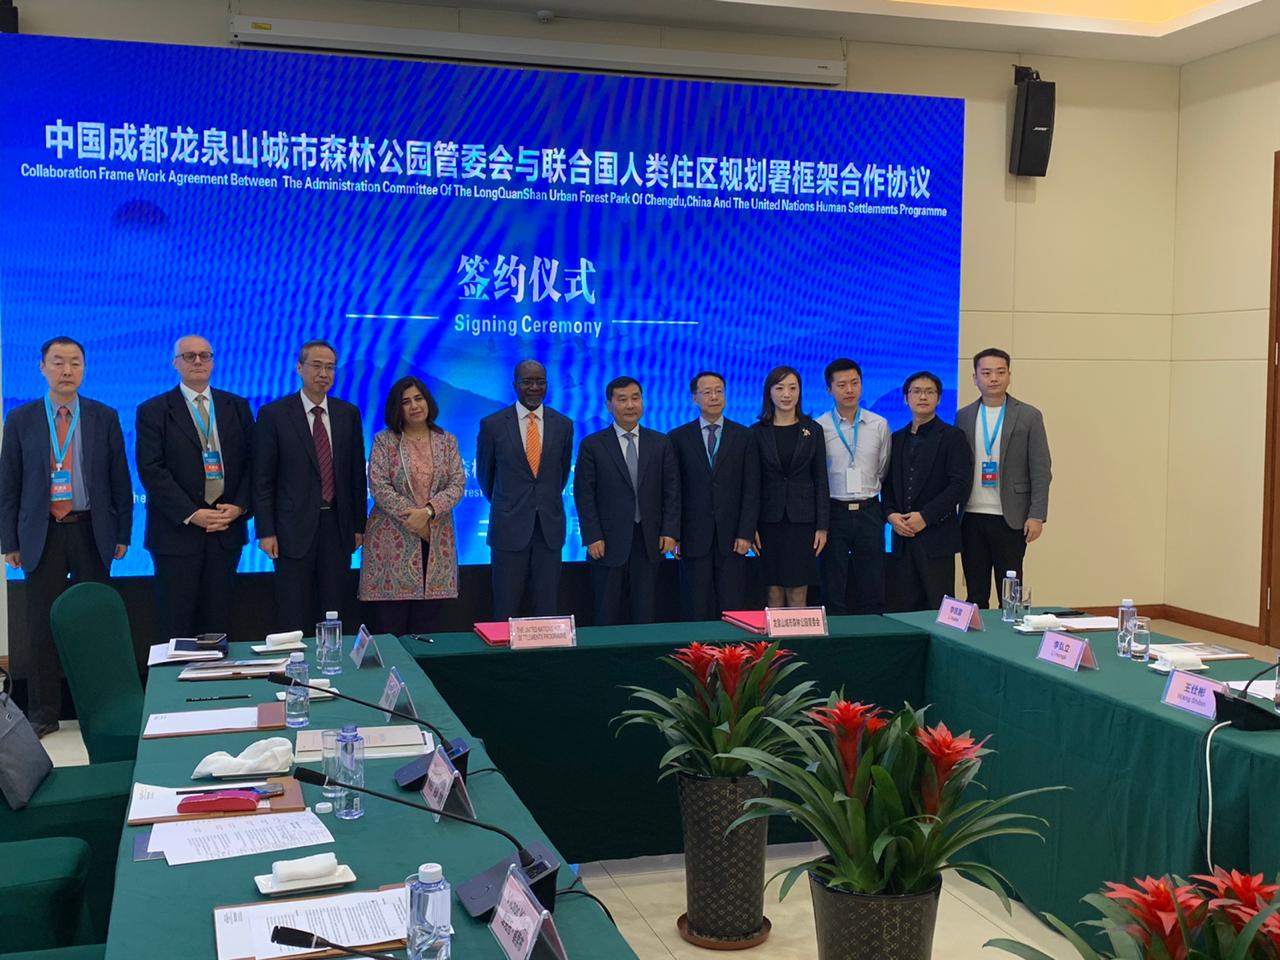 UN-Habitat Deputy Executive Director, Victor Kisob with other dignitaries at the Signing ceremony of an MoU with Chengdu regarding the ecological evaluation on Longquanshan forestry park.